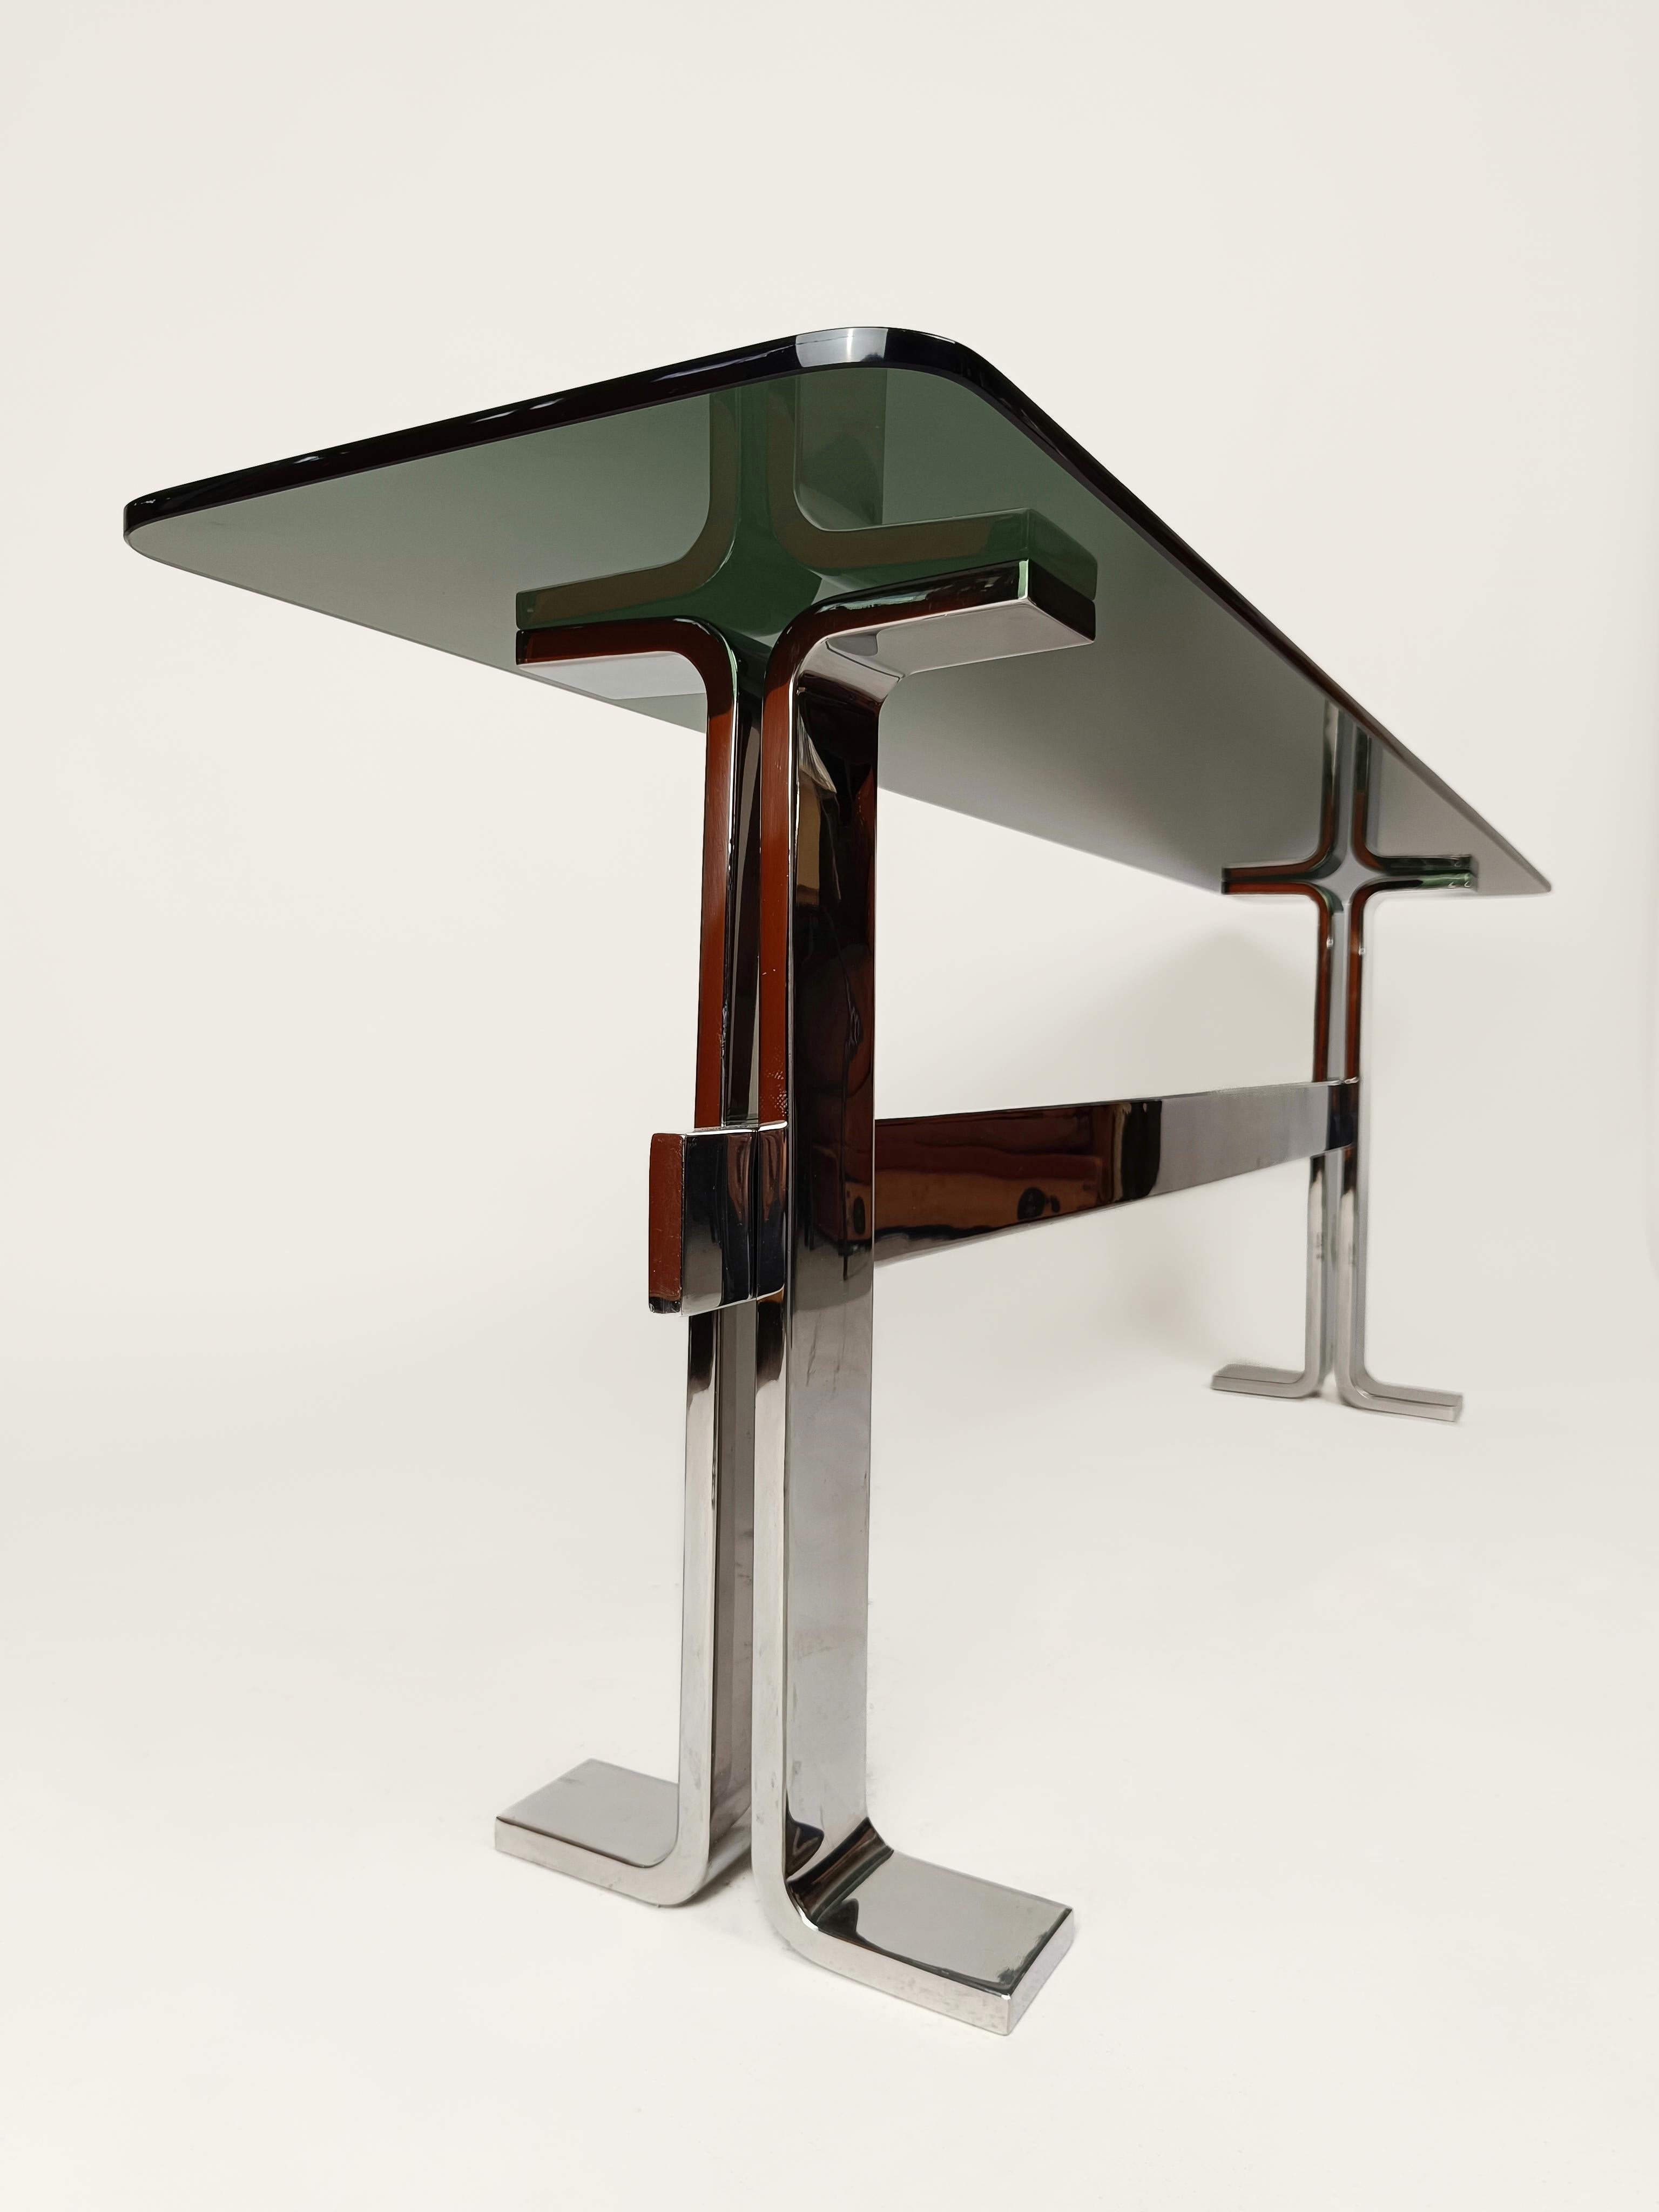 A console attributed to the production of the Saporiti brand based on a design by Vitottorio Introini, made in Italy between the 60s and 70s.
The structure is in chromed metal, removable and not particularly heavy, the design is characterized by